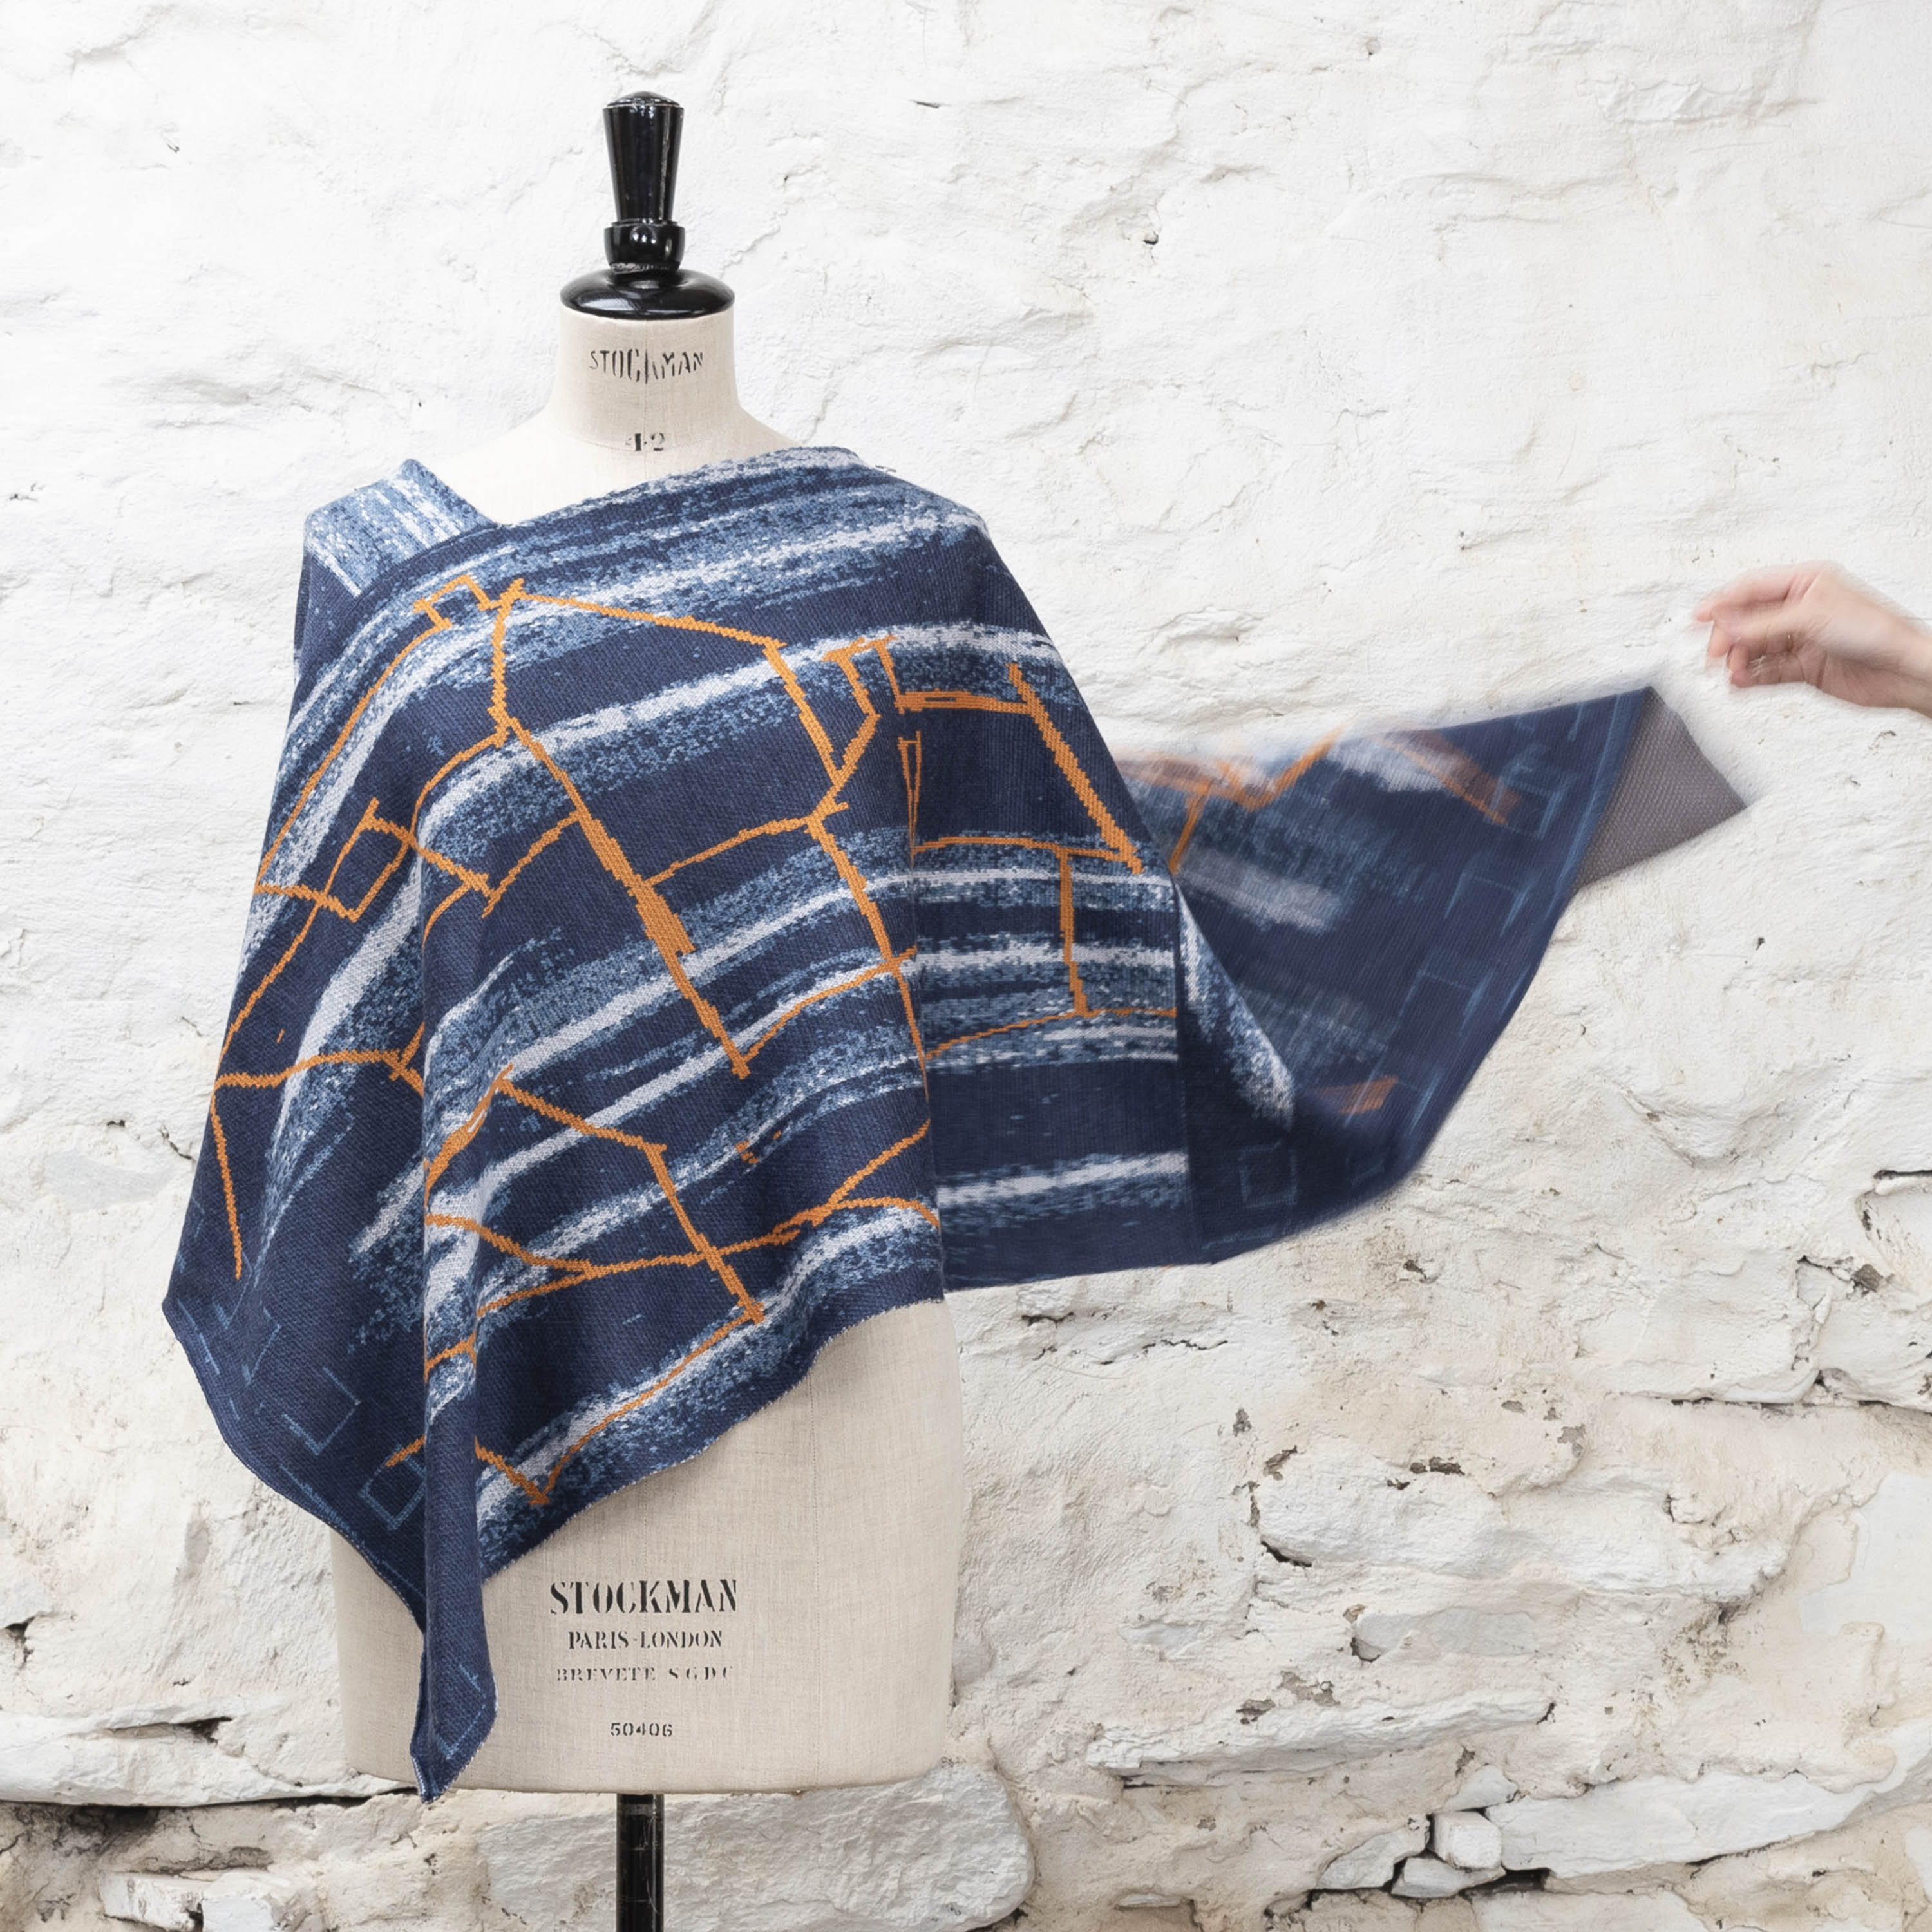 An edgy designer knitwear cape, made in Scotland. Abstract patterning in orange and blue, knitted in extra-fine merino